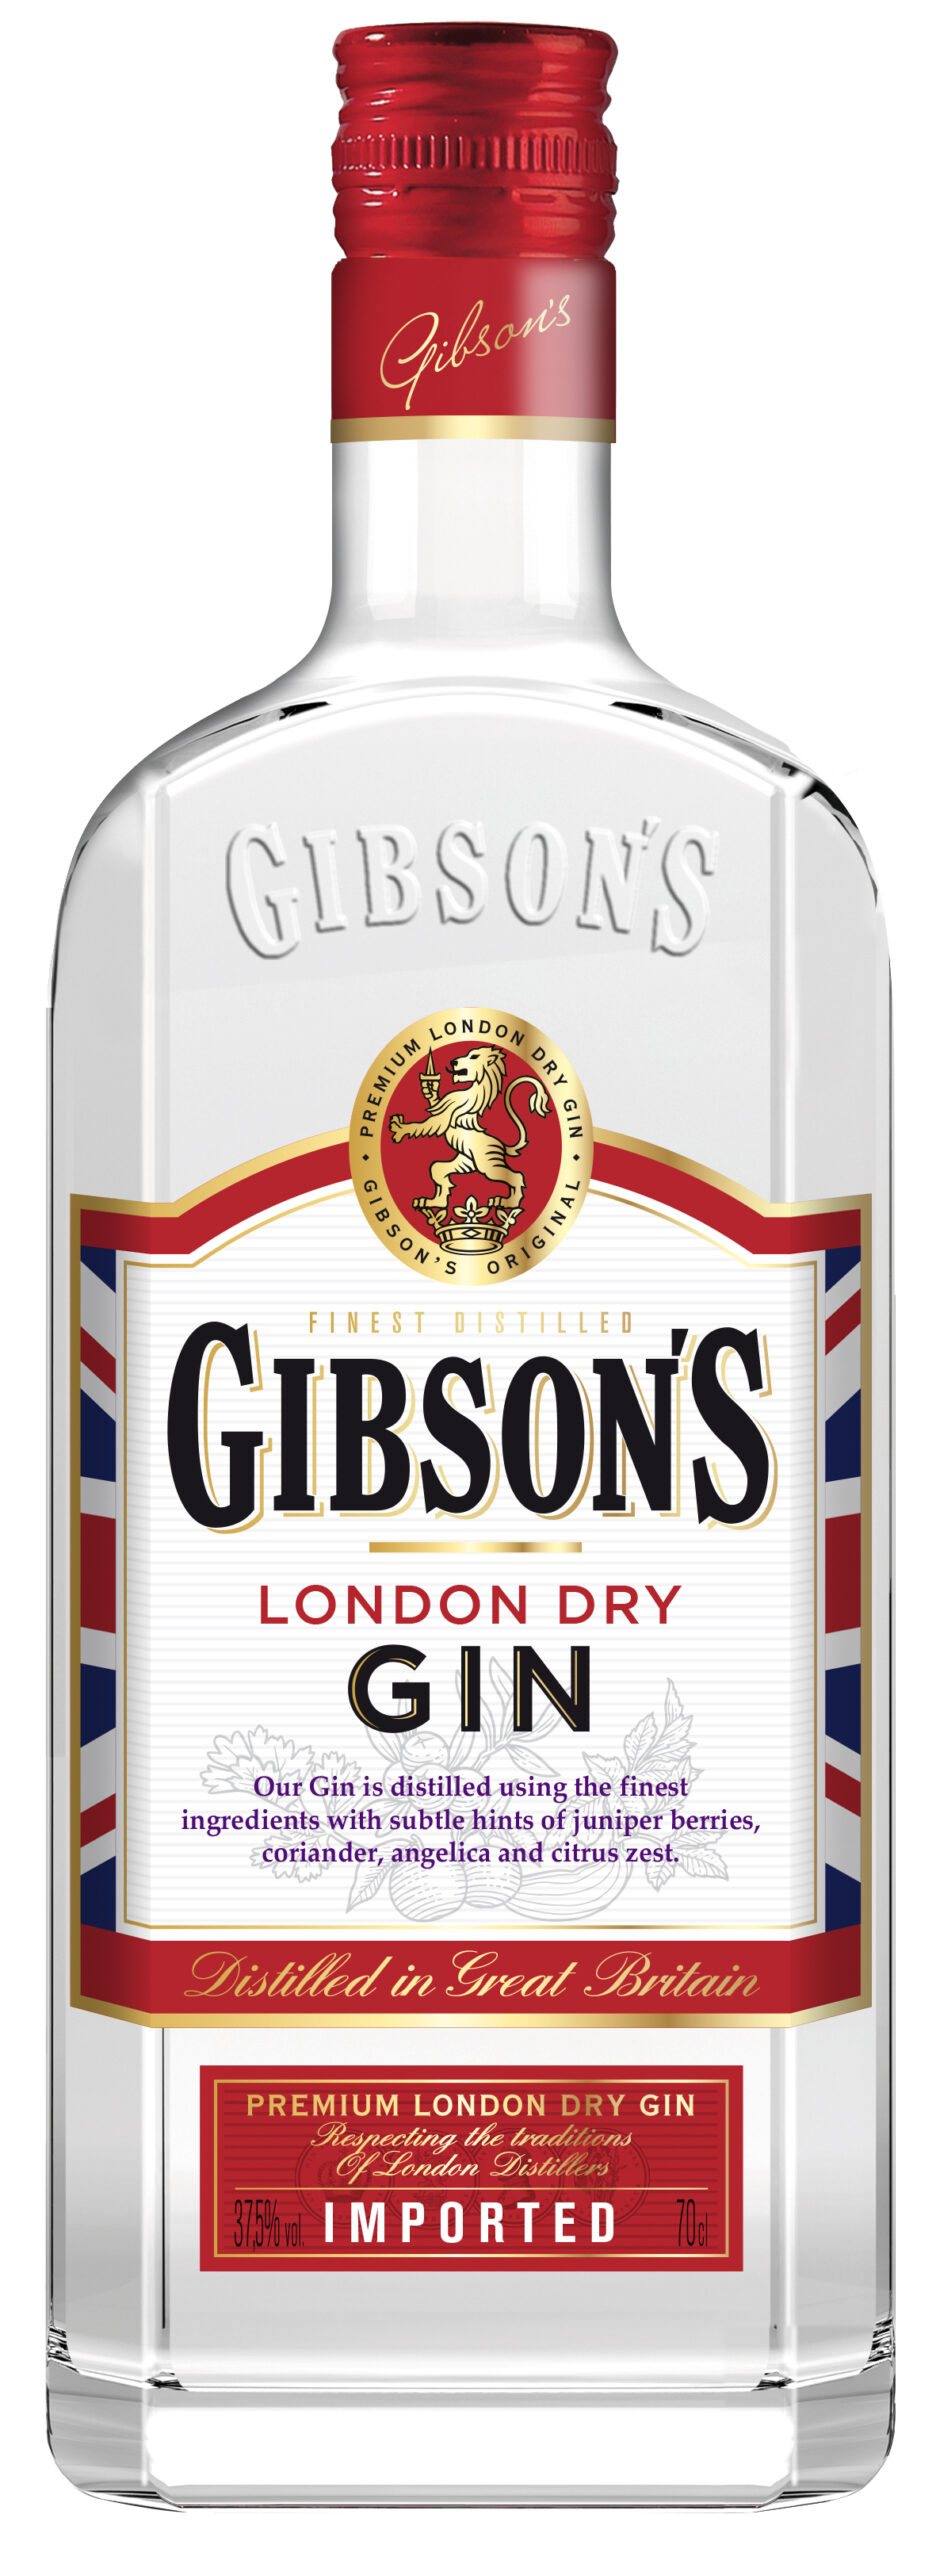 Gibsons London Dry Gin - 0.7 L : Gibsons London Dry Gin